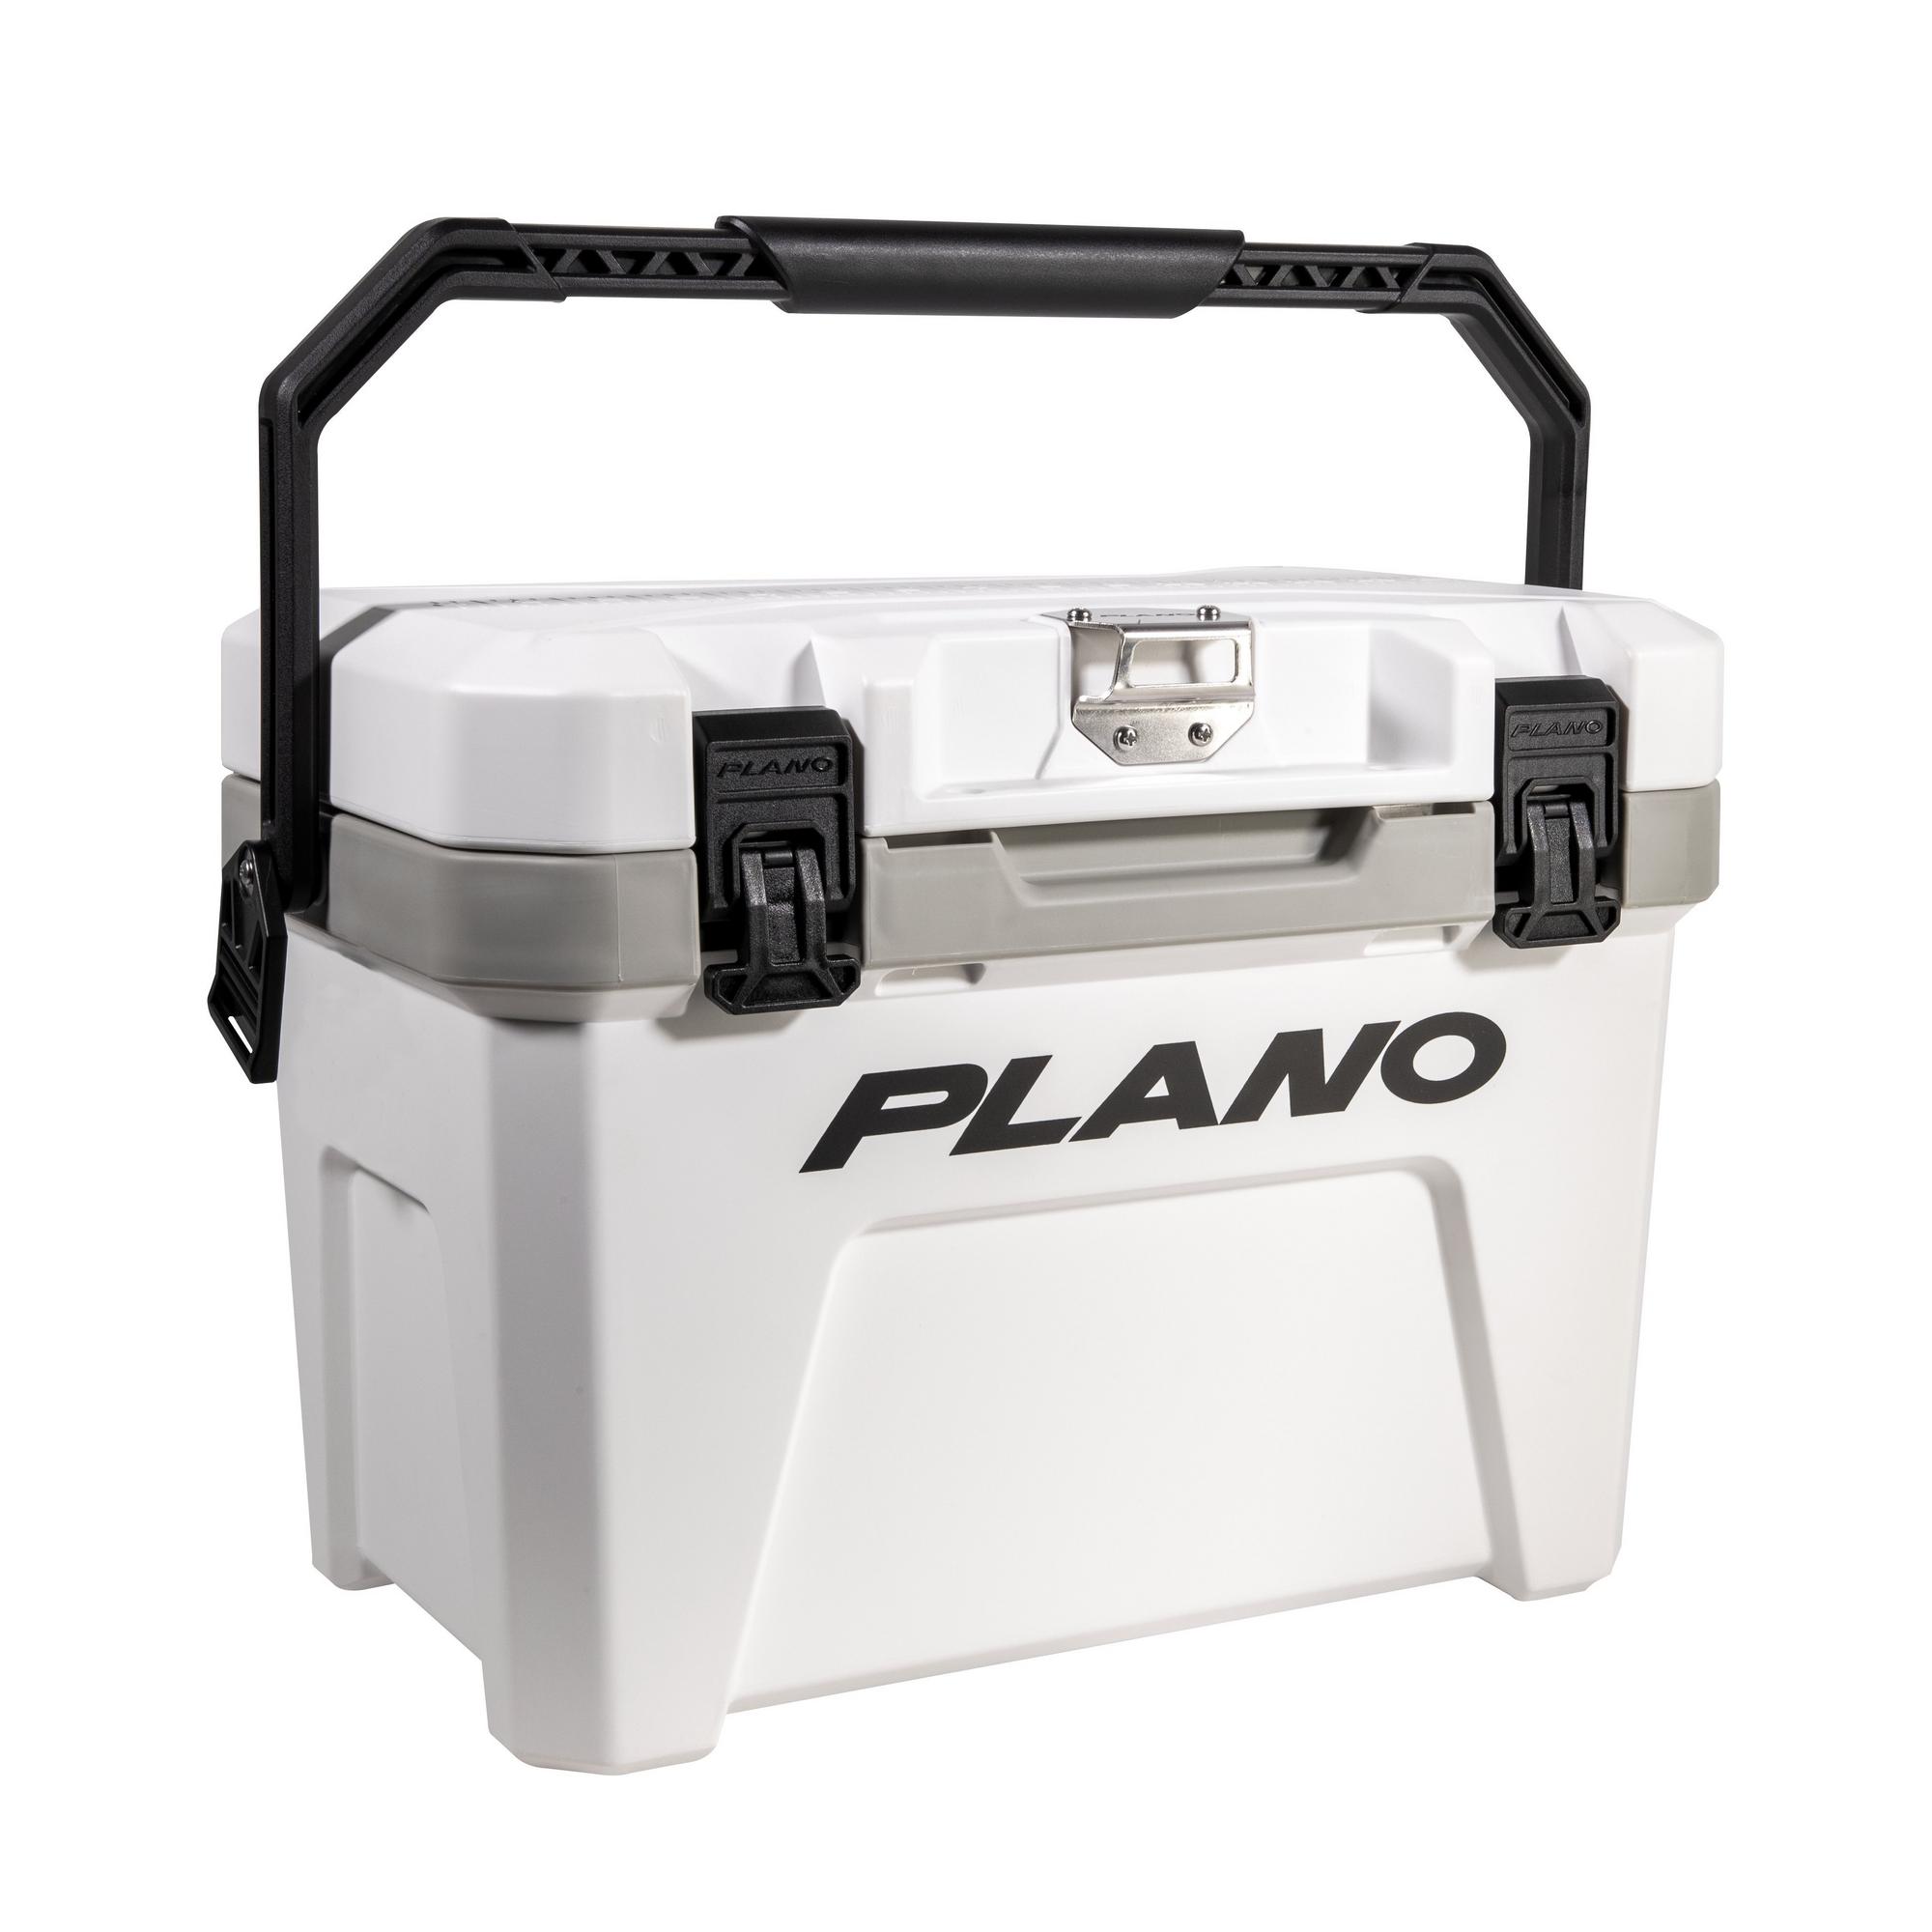 Plano Frost Hard Cooler 20L - Ice White